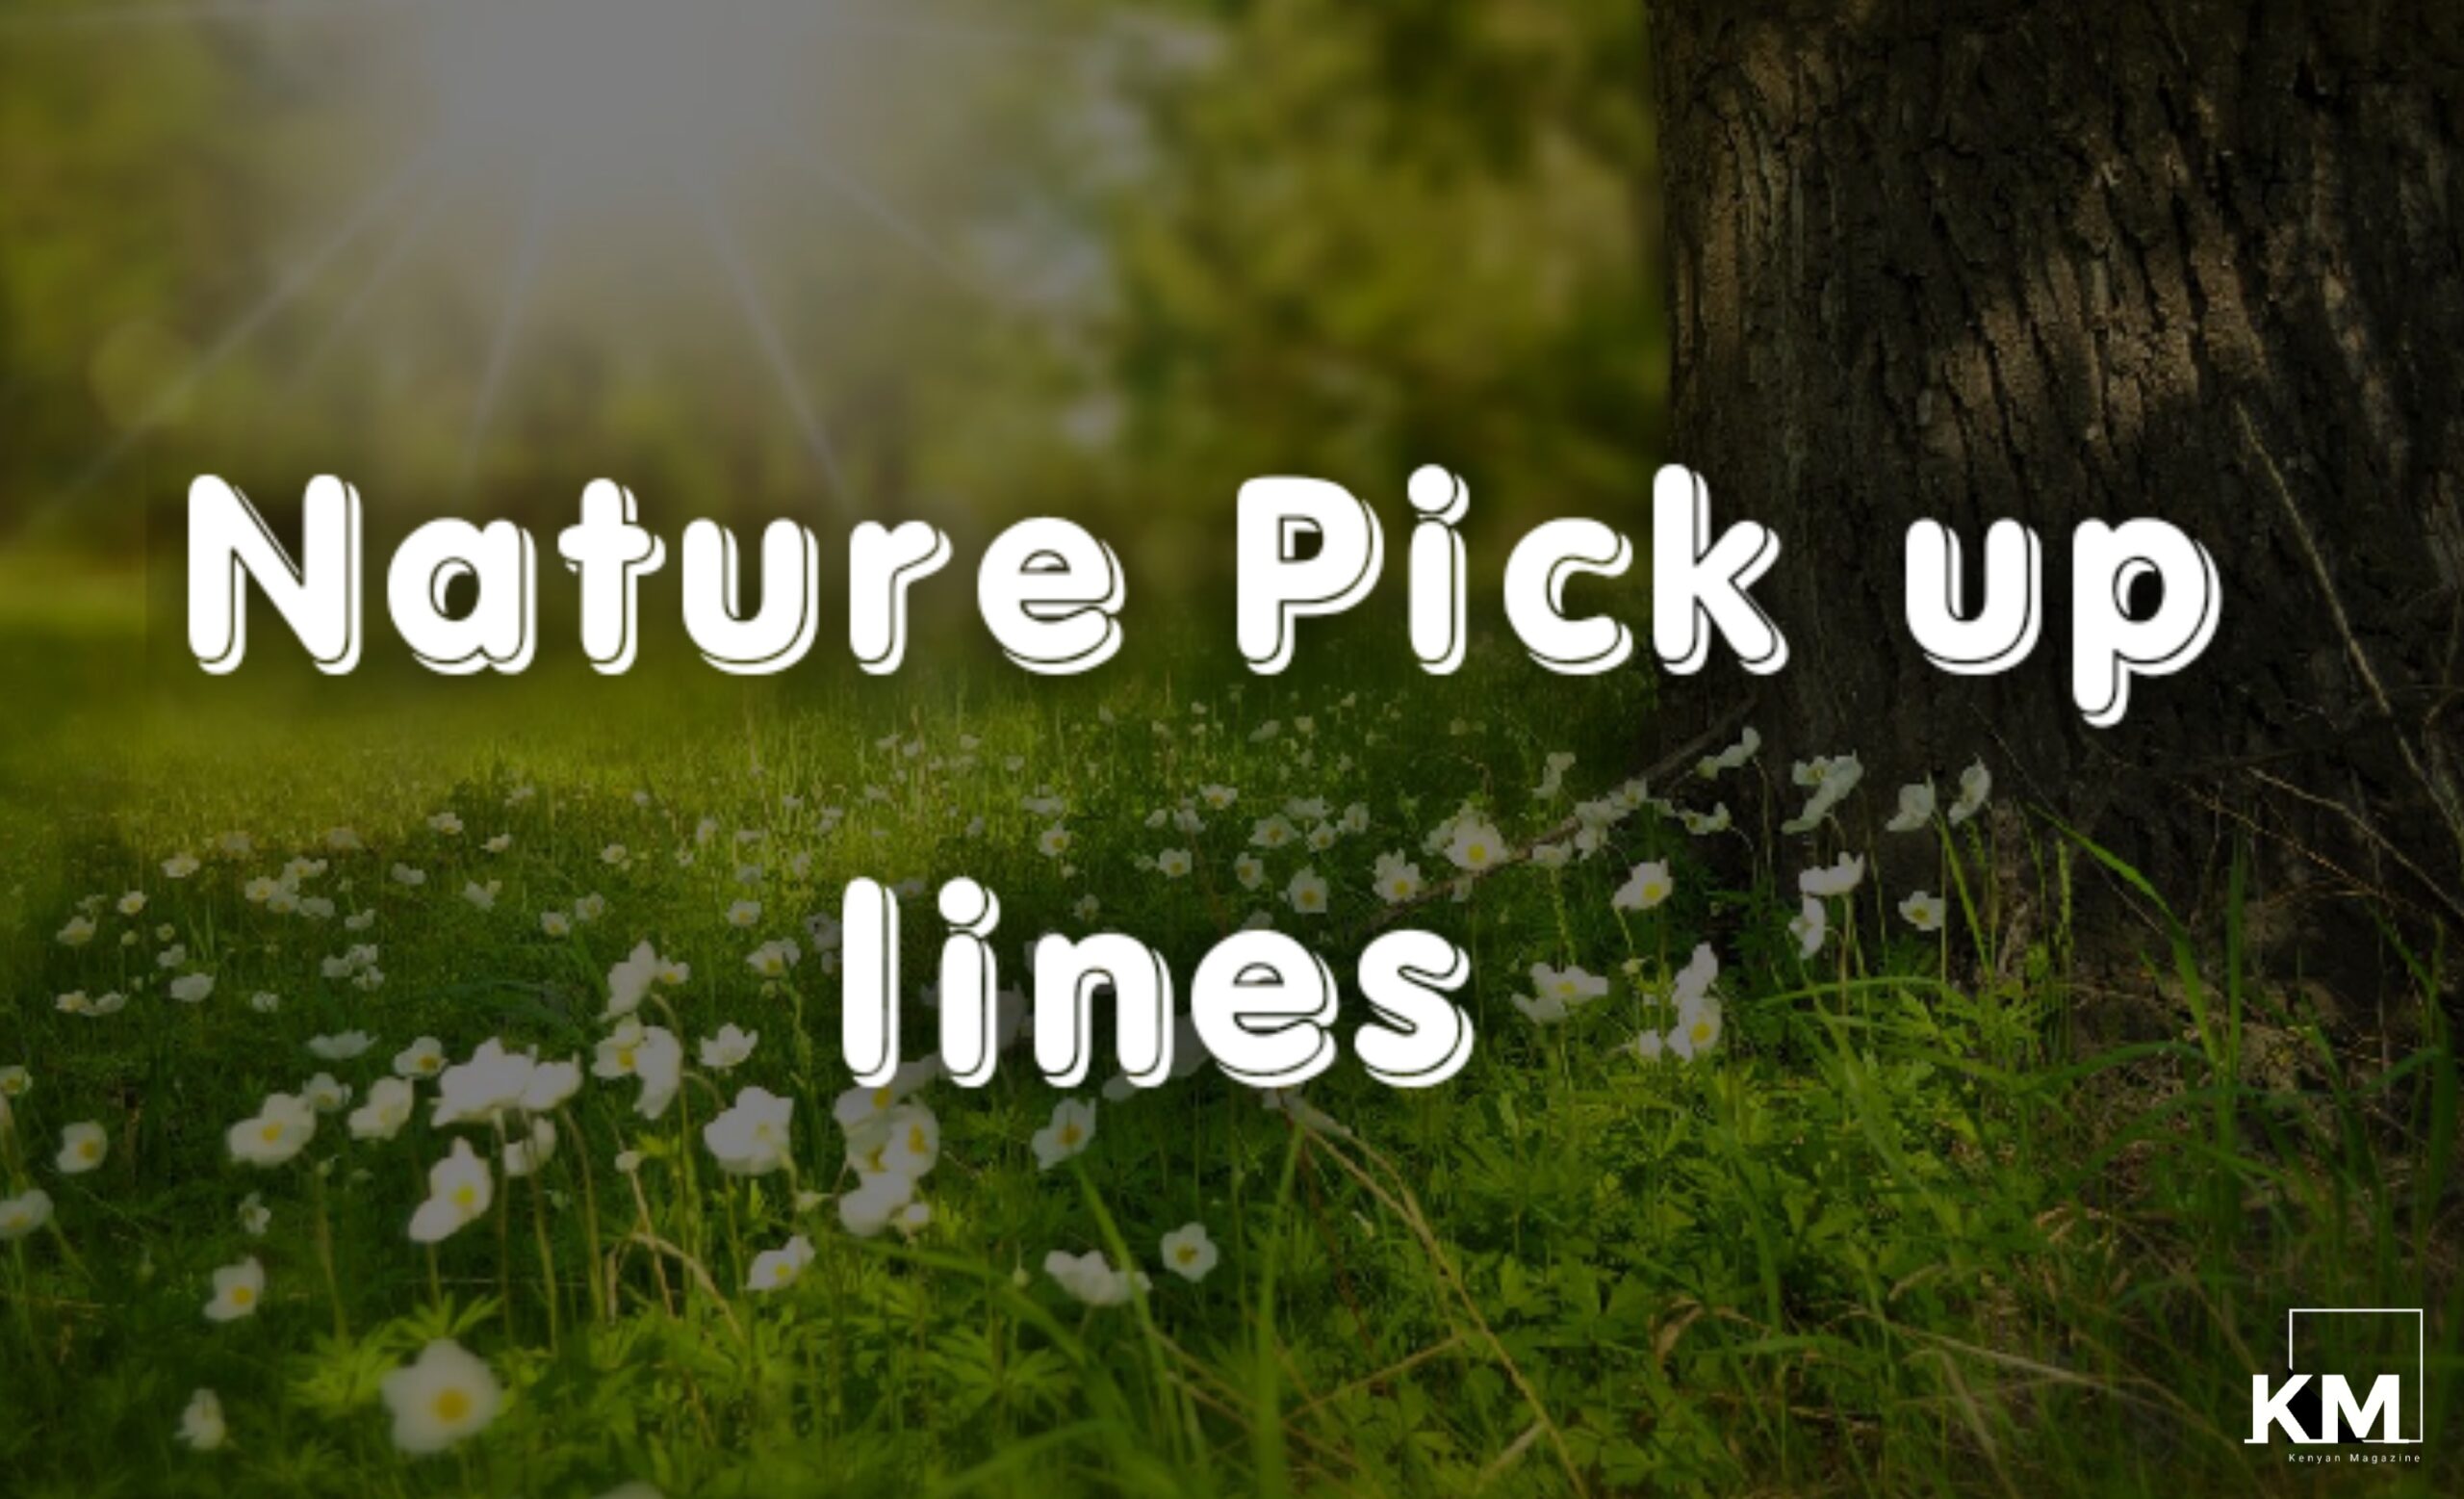 Nature Pick up lines